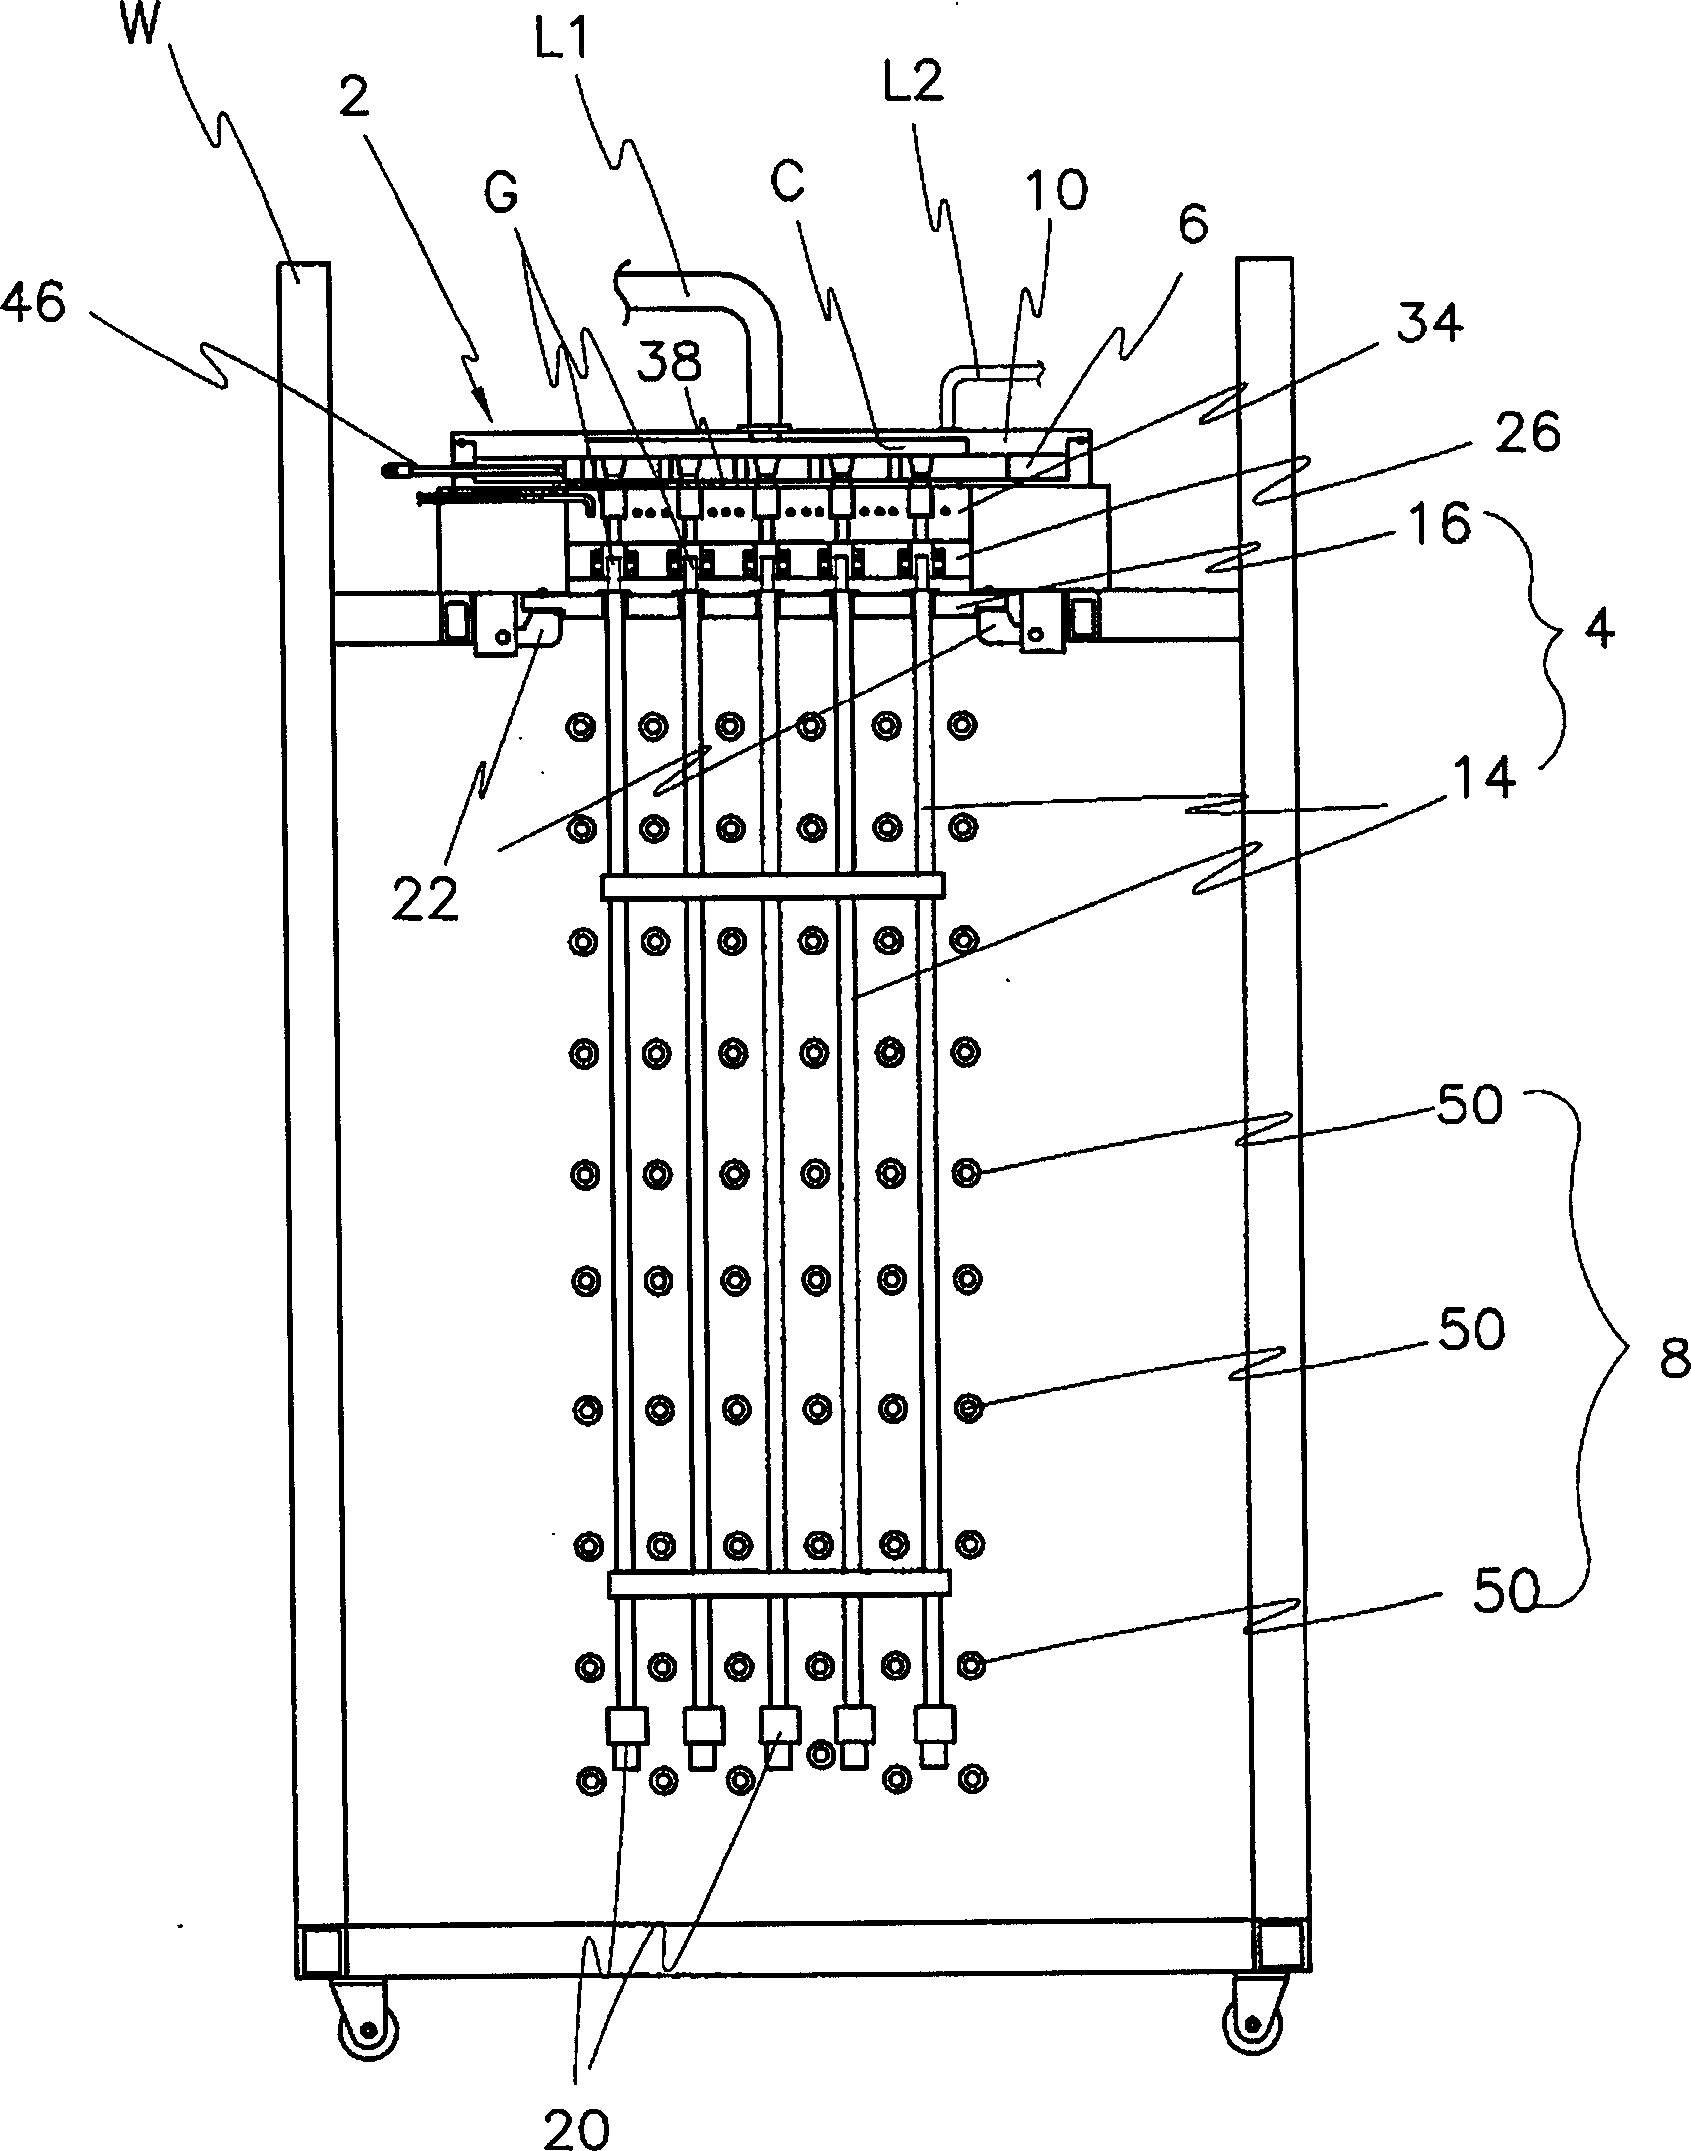 Apparatus and method for manufacturing fluorescent tubes